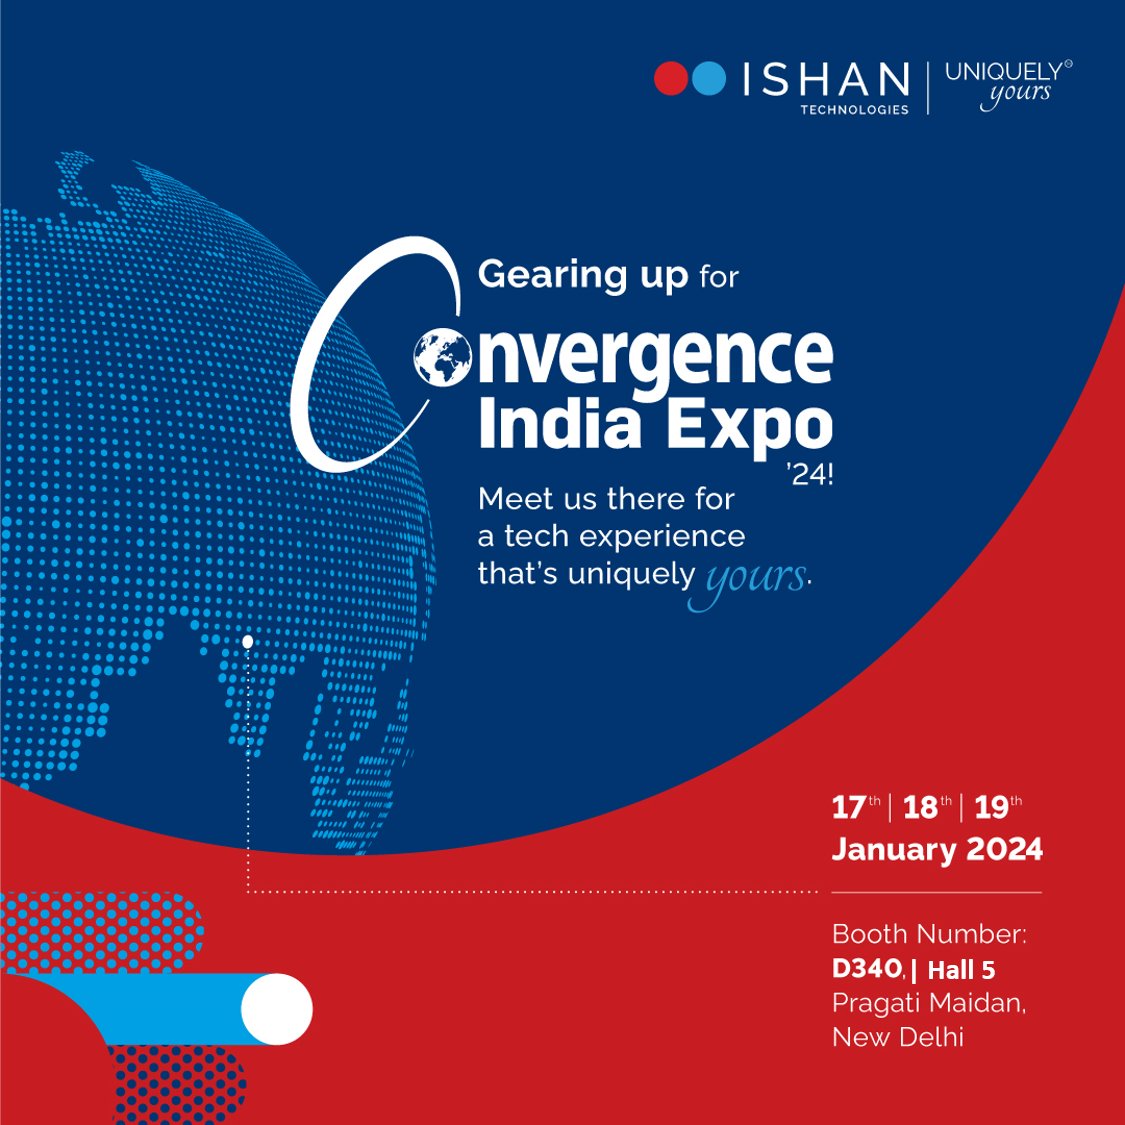 Join us at #Convergence 2024 from 17th-19th January. Our theme: 'Customised IT and telecom solutions because one size suits none. Meet us there, register today - convergenceindia.org/eiexpolive.aspx

#Convergence2024 #Networking #Collaboration #Ishantechnologies #ishanism